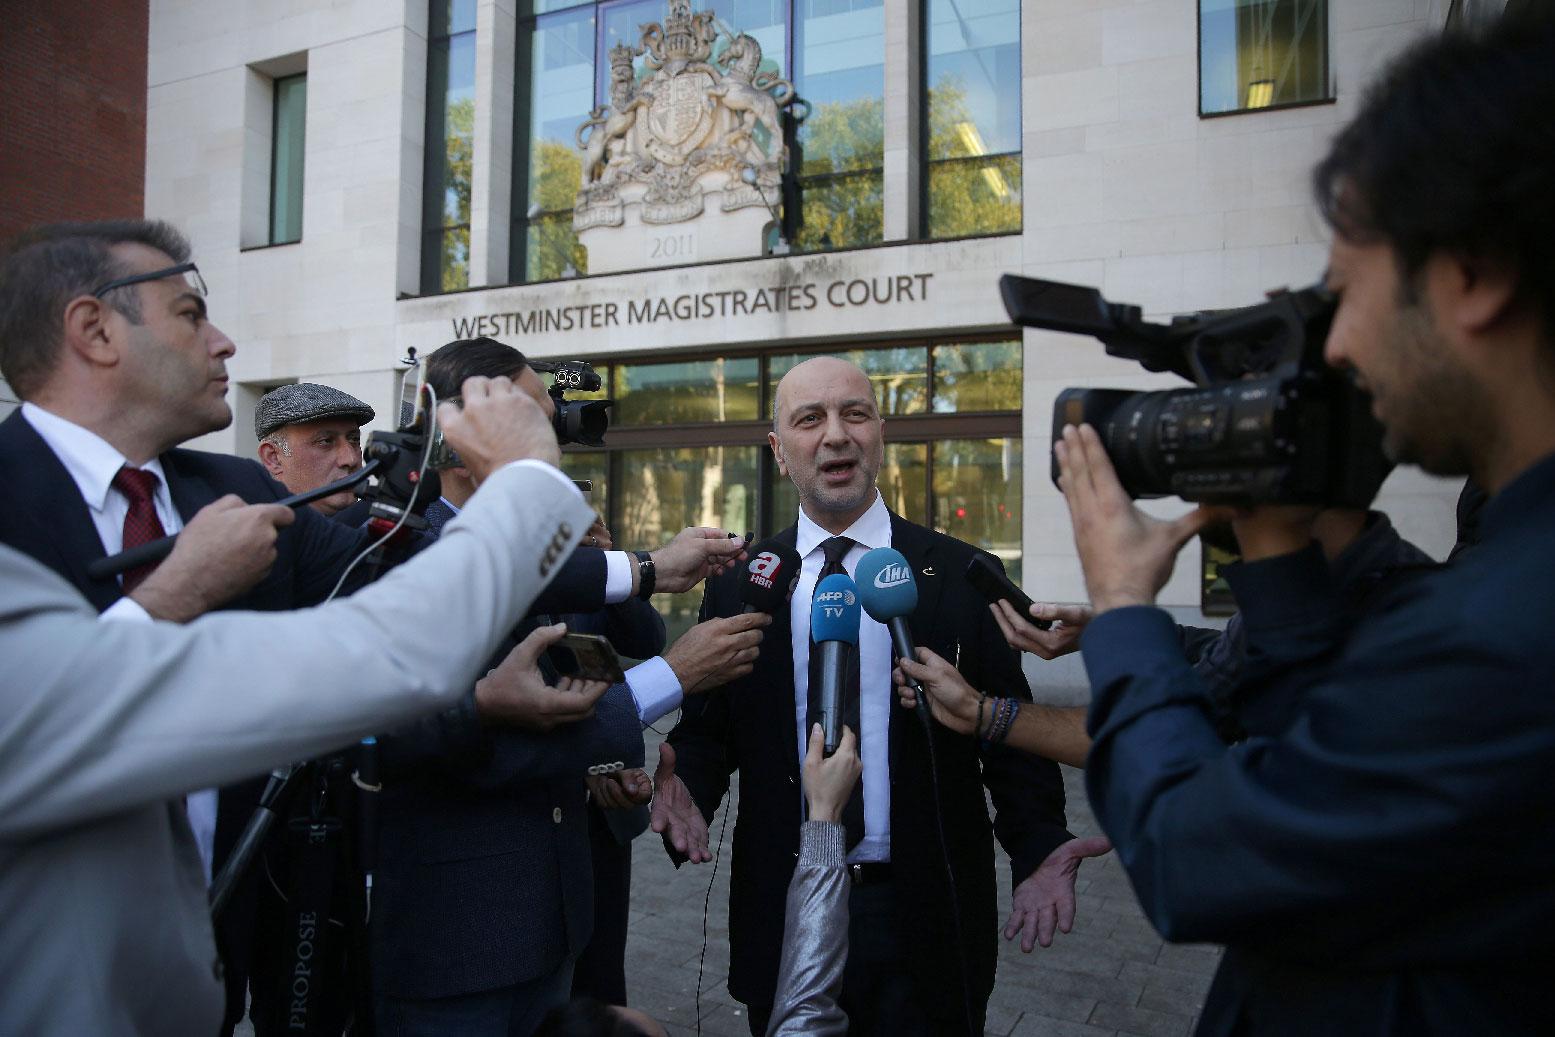 Turkish businessman Akin Ipek speaks to members of the media as he leaves after appearing at Westminster Magistrates Court in London on September 25, 2018.